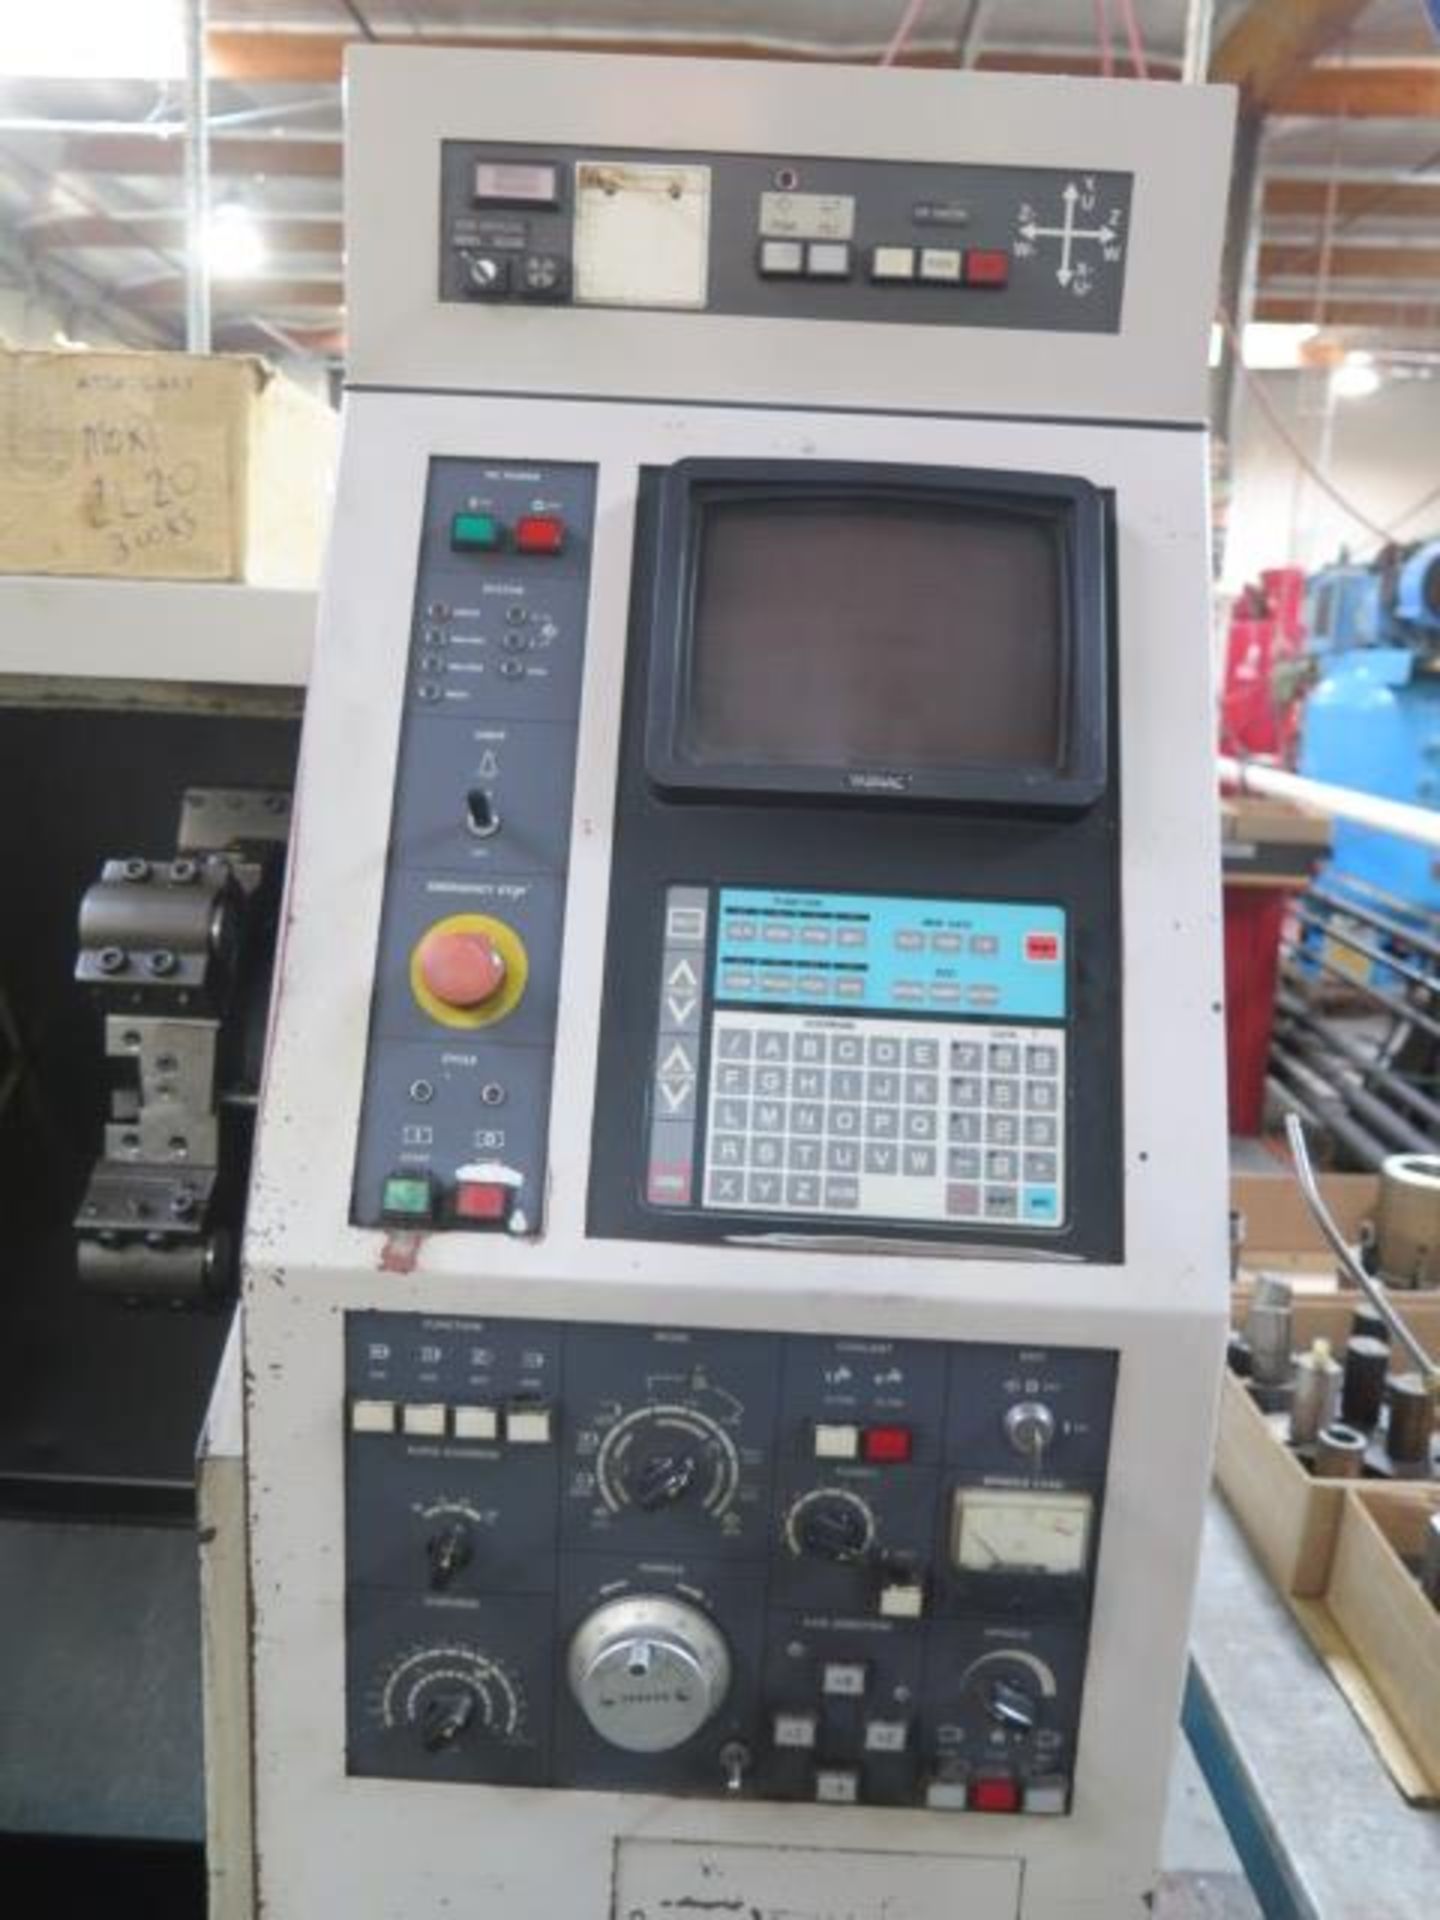 Mori Seiki CL-20A CNC Lathe s/n 544 w/ Yasnac Controls, Tool Presetter, 10-Station, SOLD AS IS - Image 8 of 10